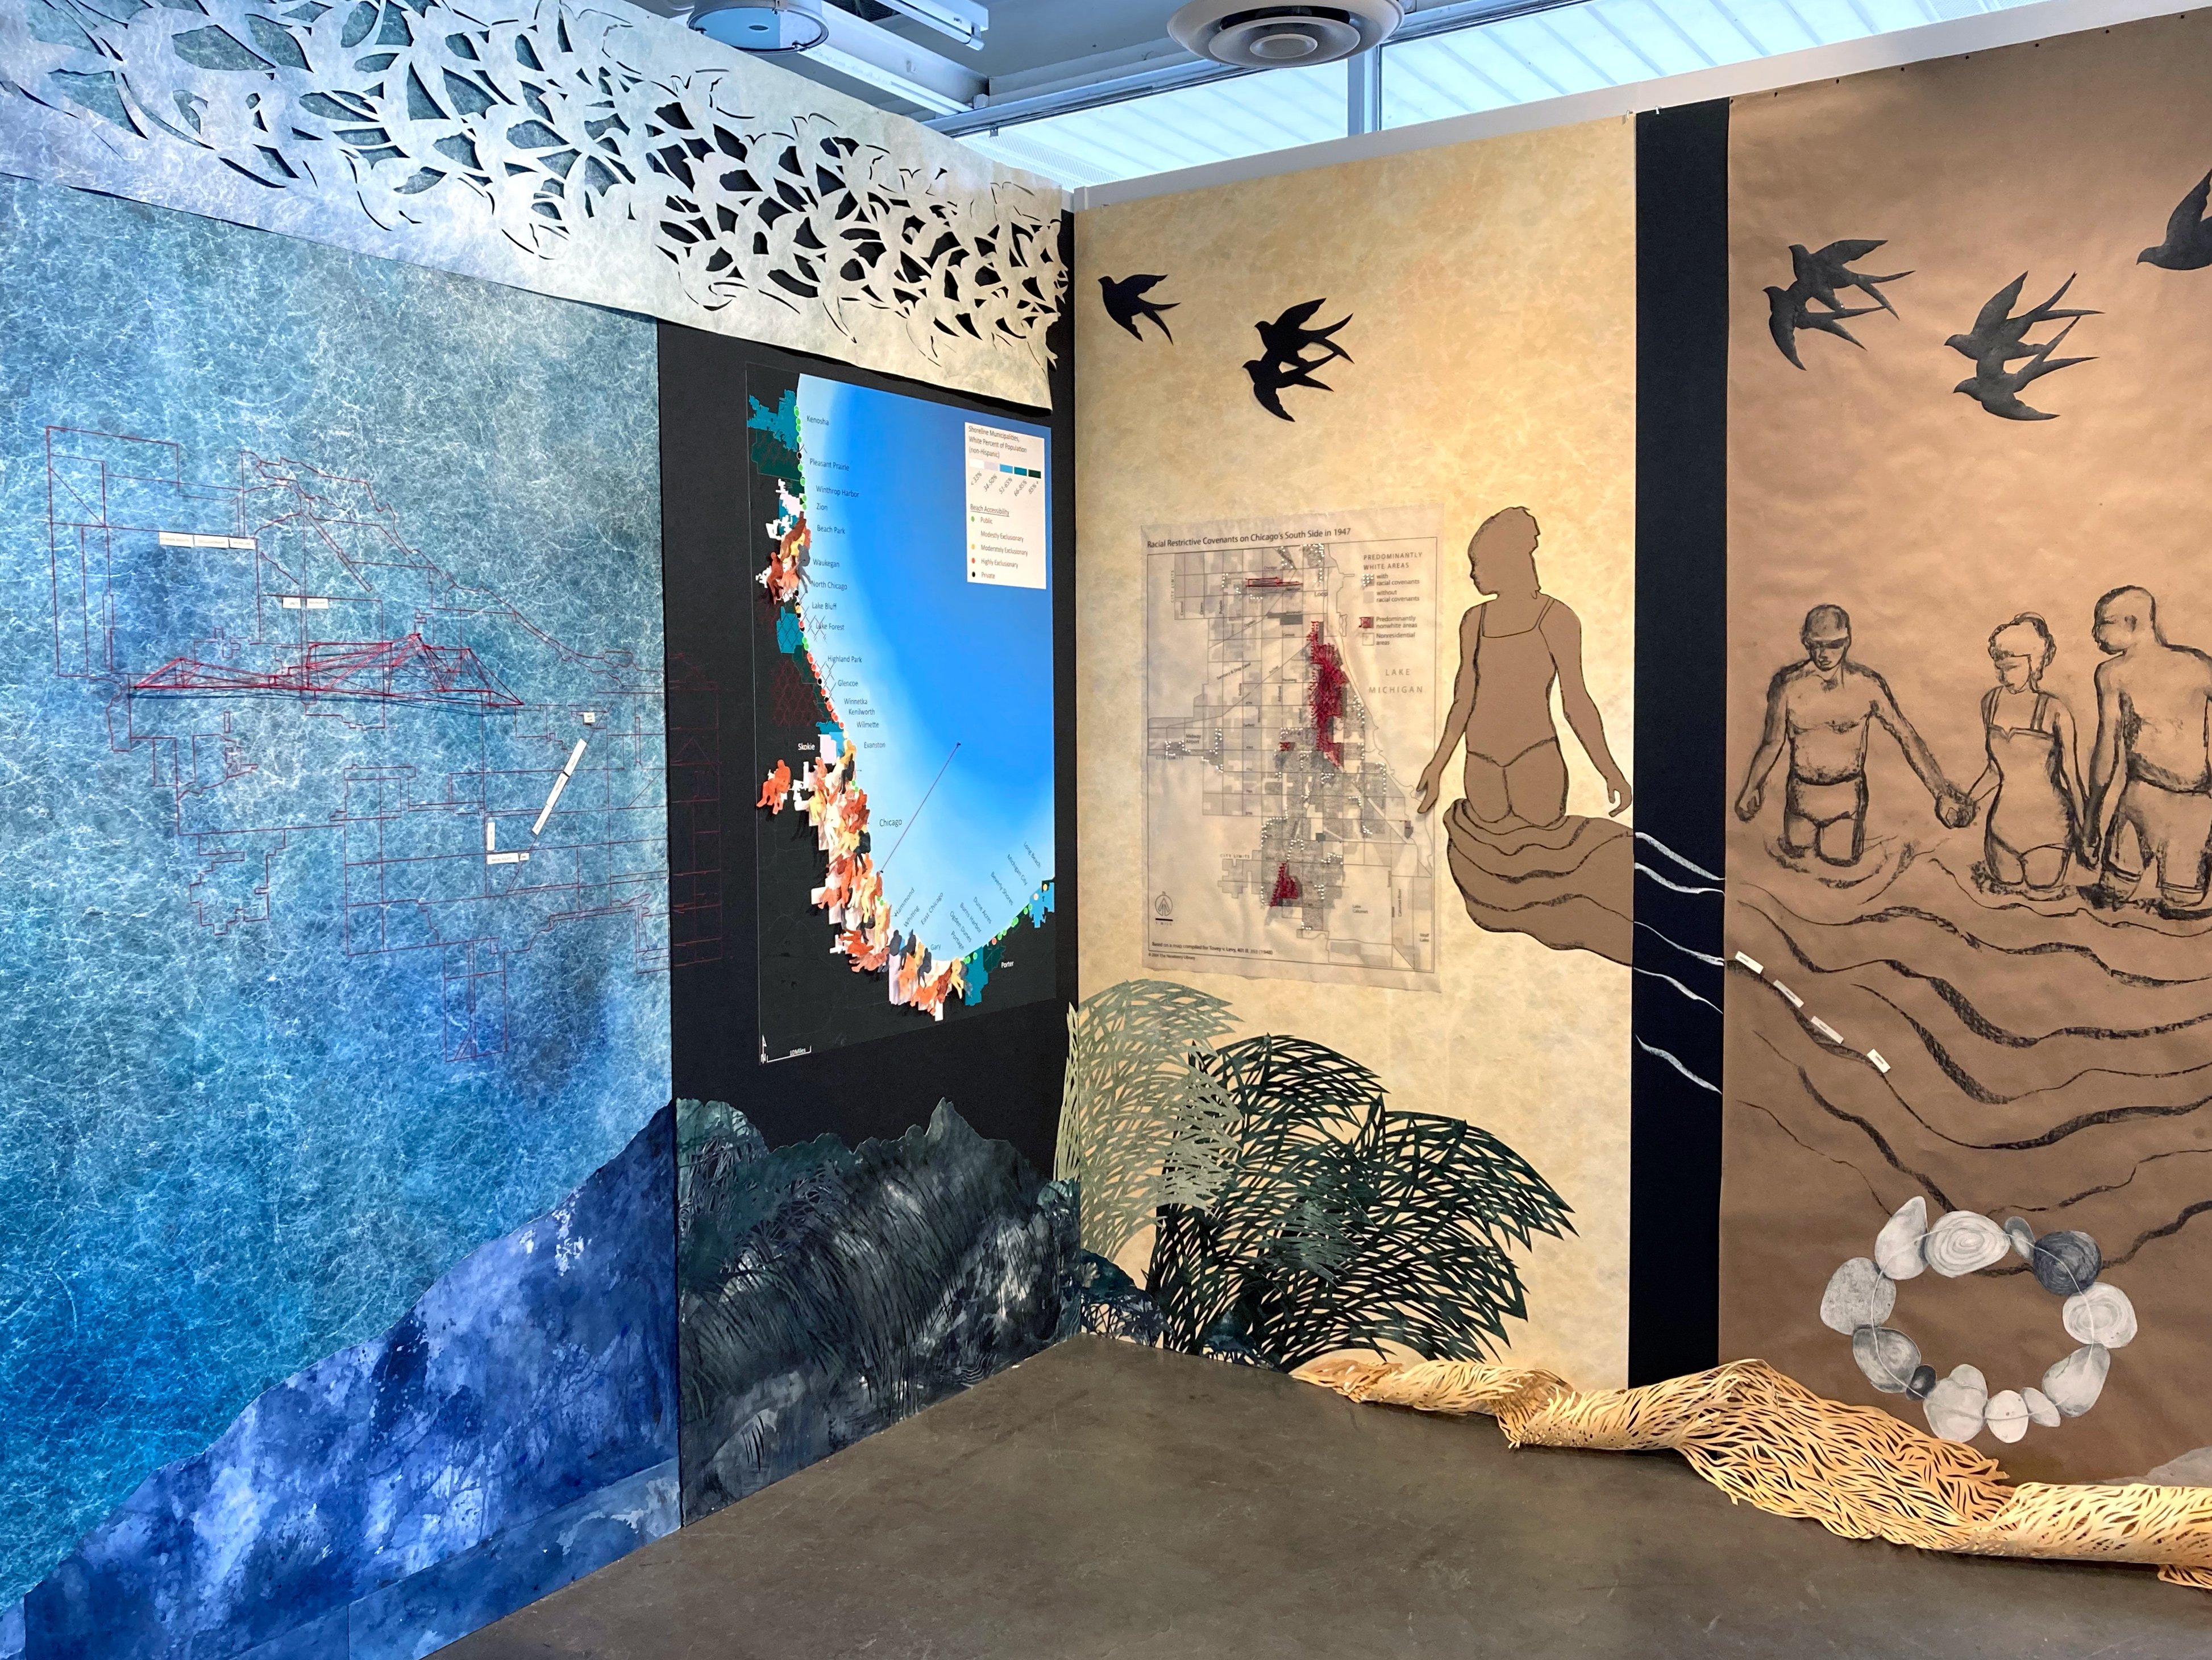 Installation photograph of "Right to the Shoreline" by Sonja Henderson and Cynthia Weiss, at the Evanston Art Center